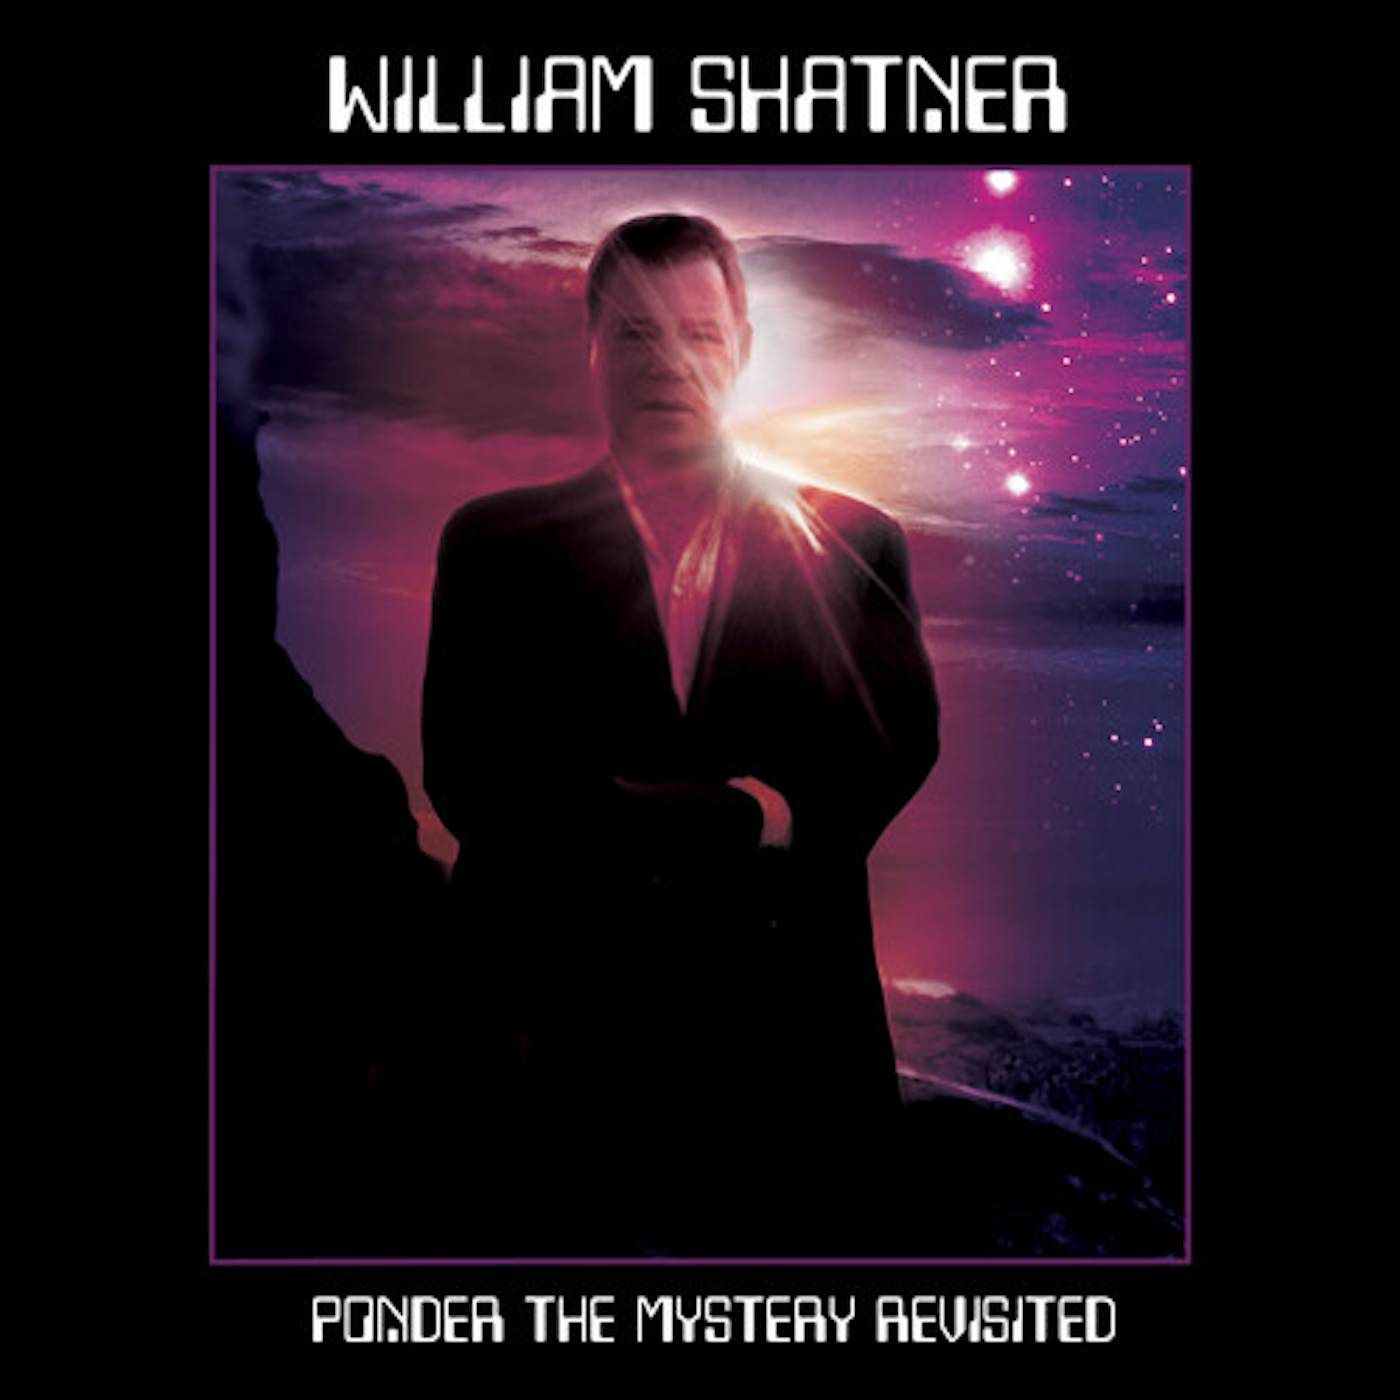 William Shatner PONDER THE MYSTERY REVISITED CD